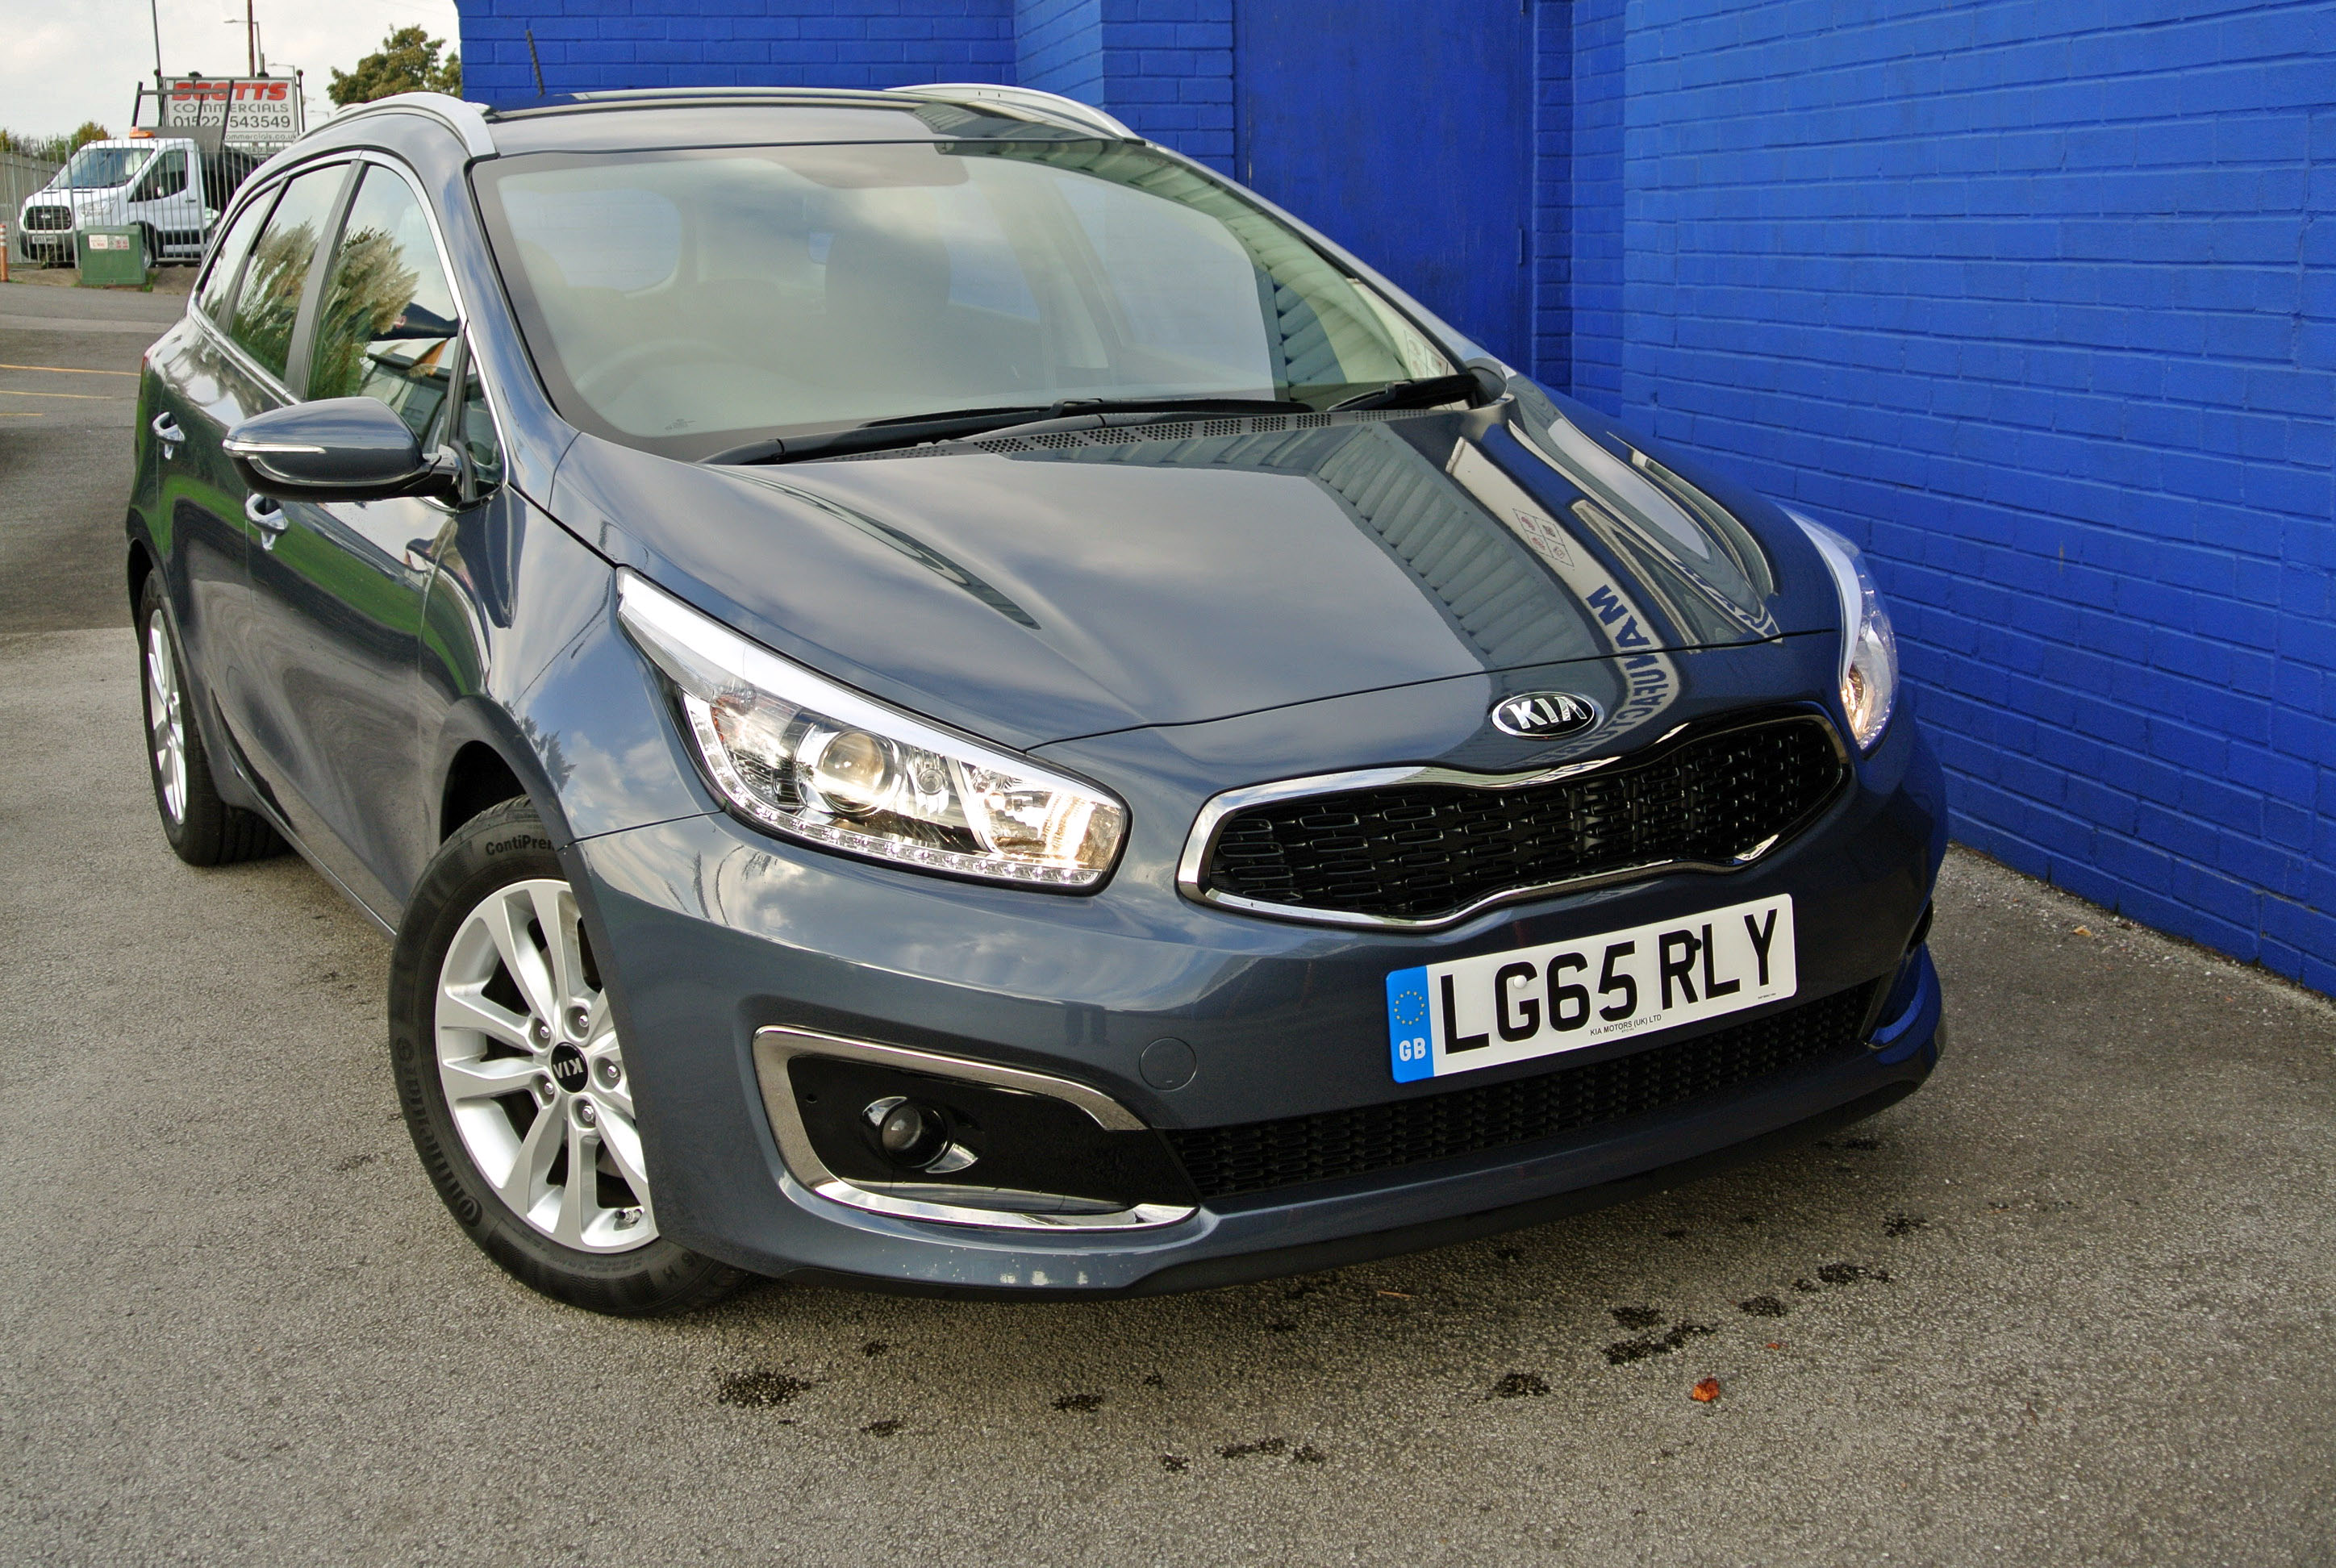 Kia cee’d tackles the compact estate car sector with excellent SW